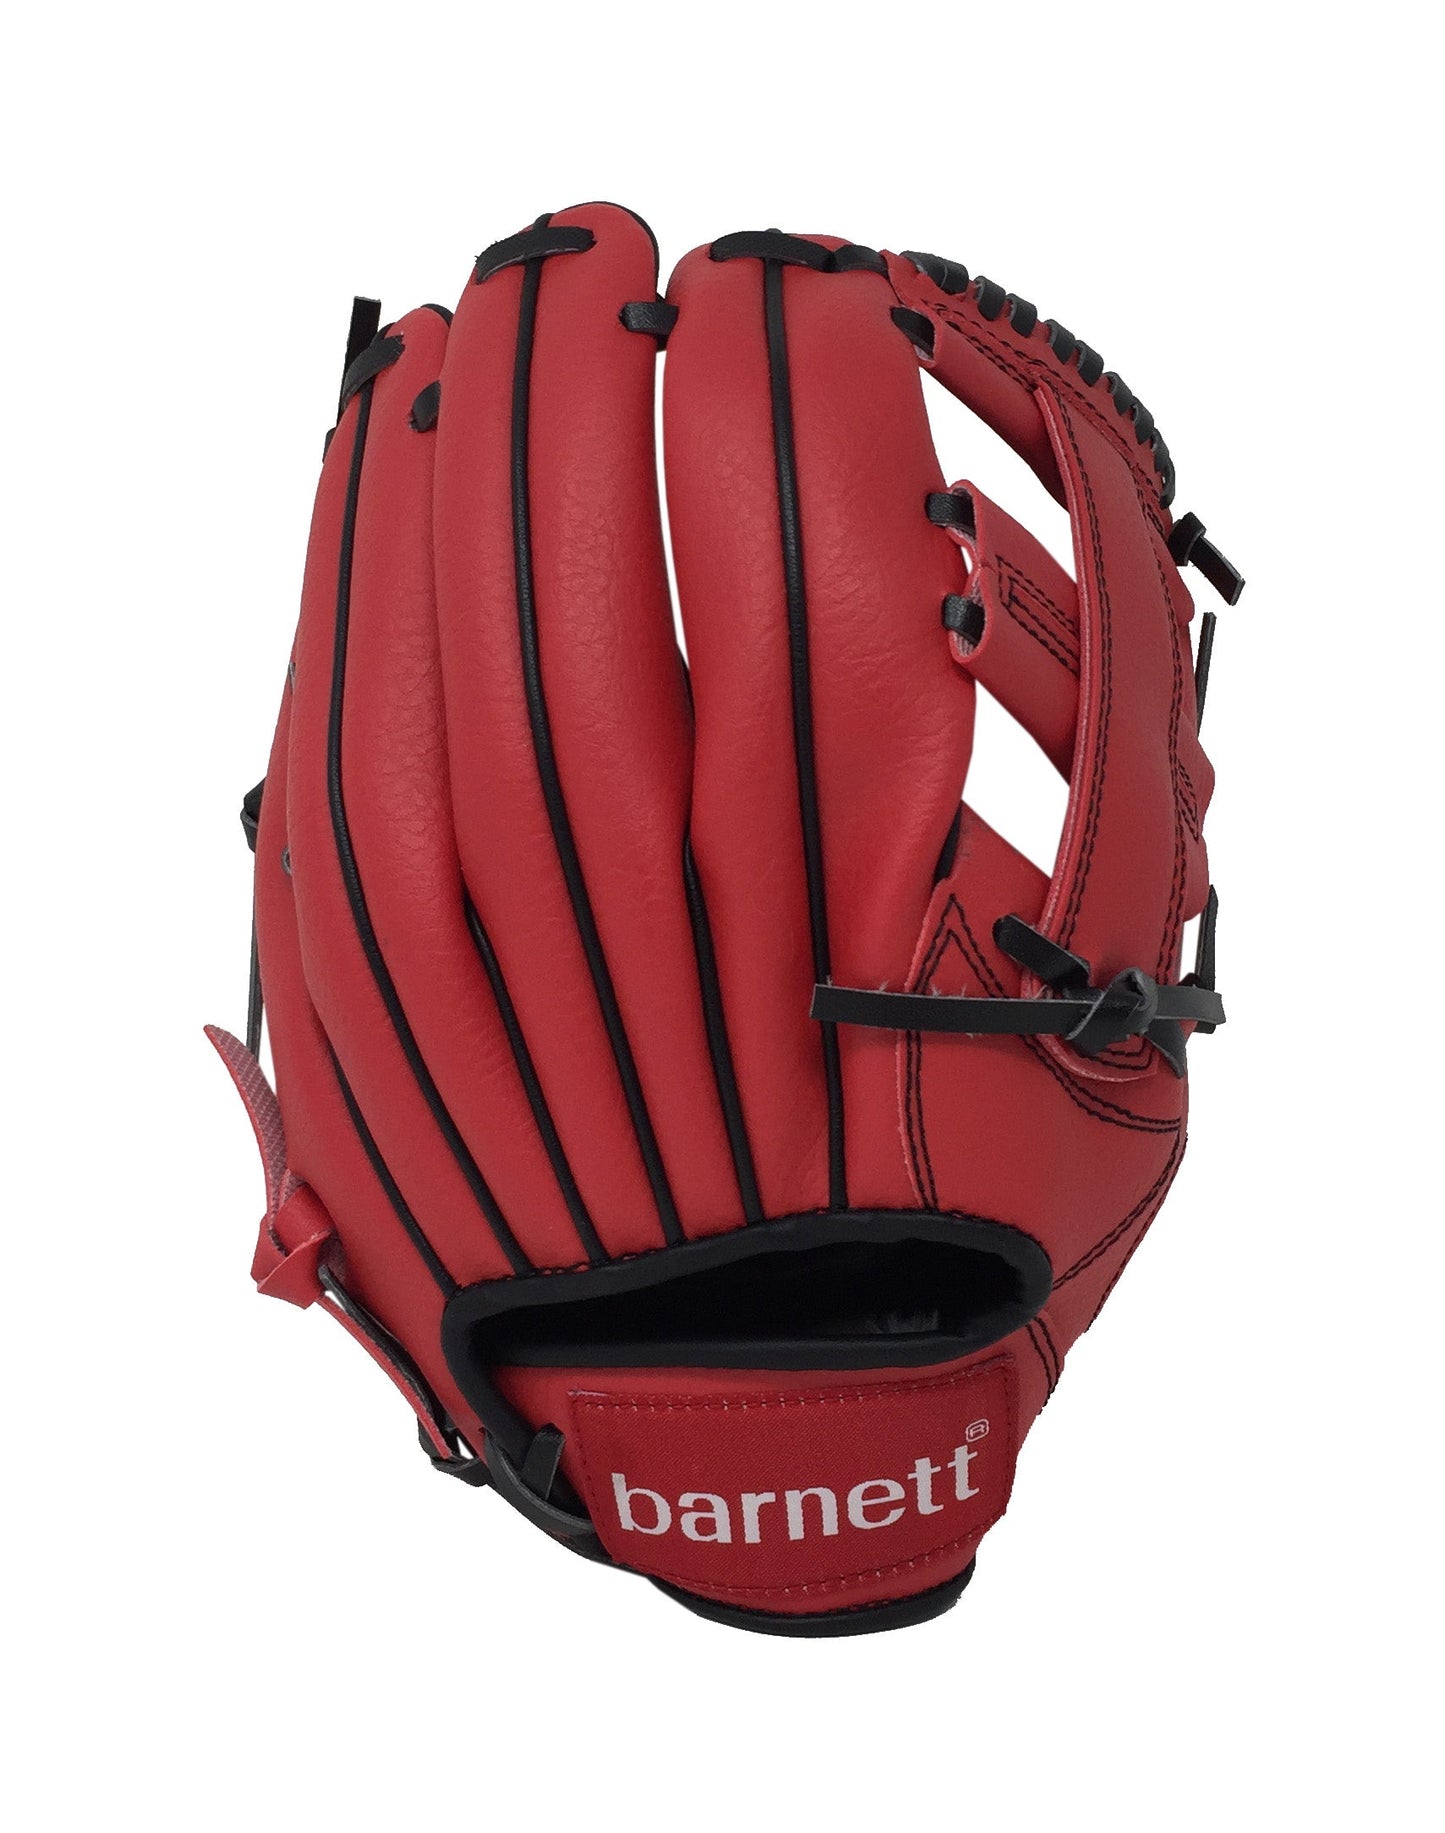 JL-110 - Baseball glove, outfield, polyurethane, size 11", red